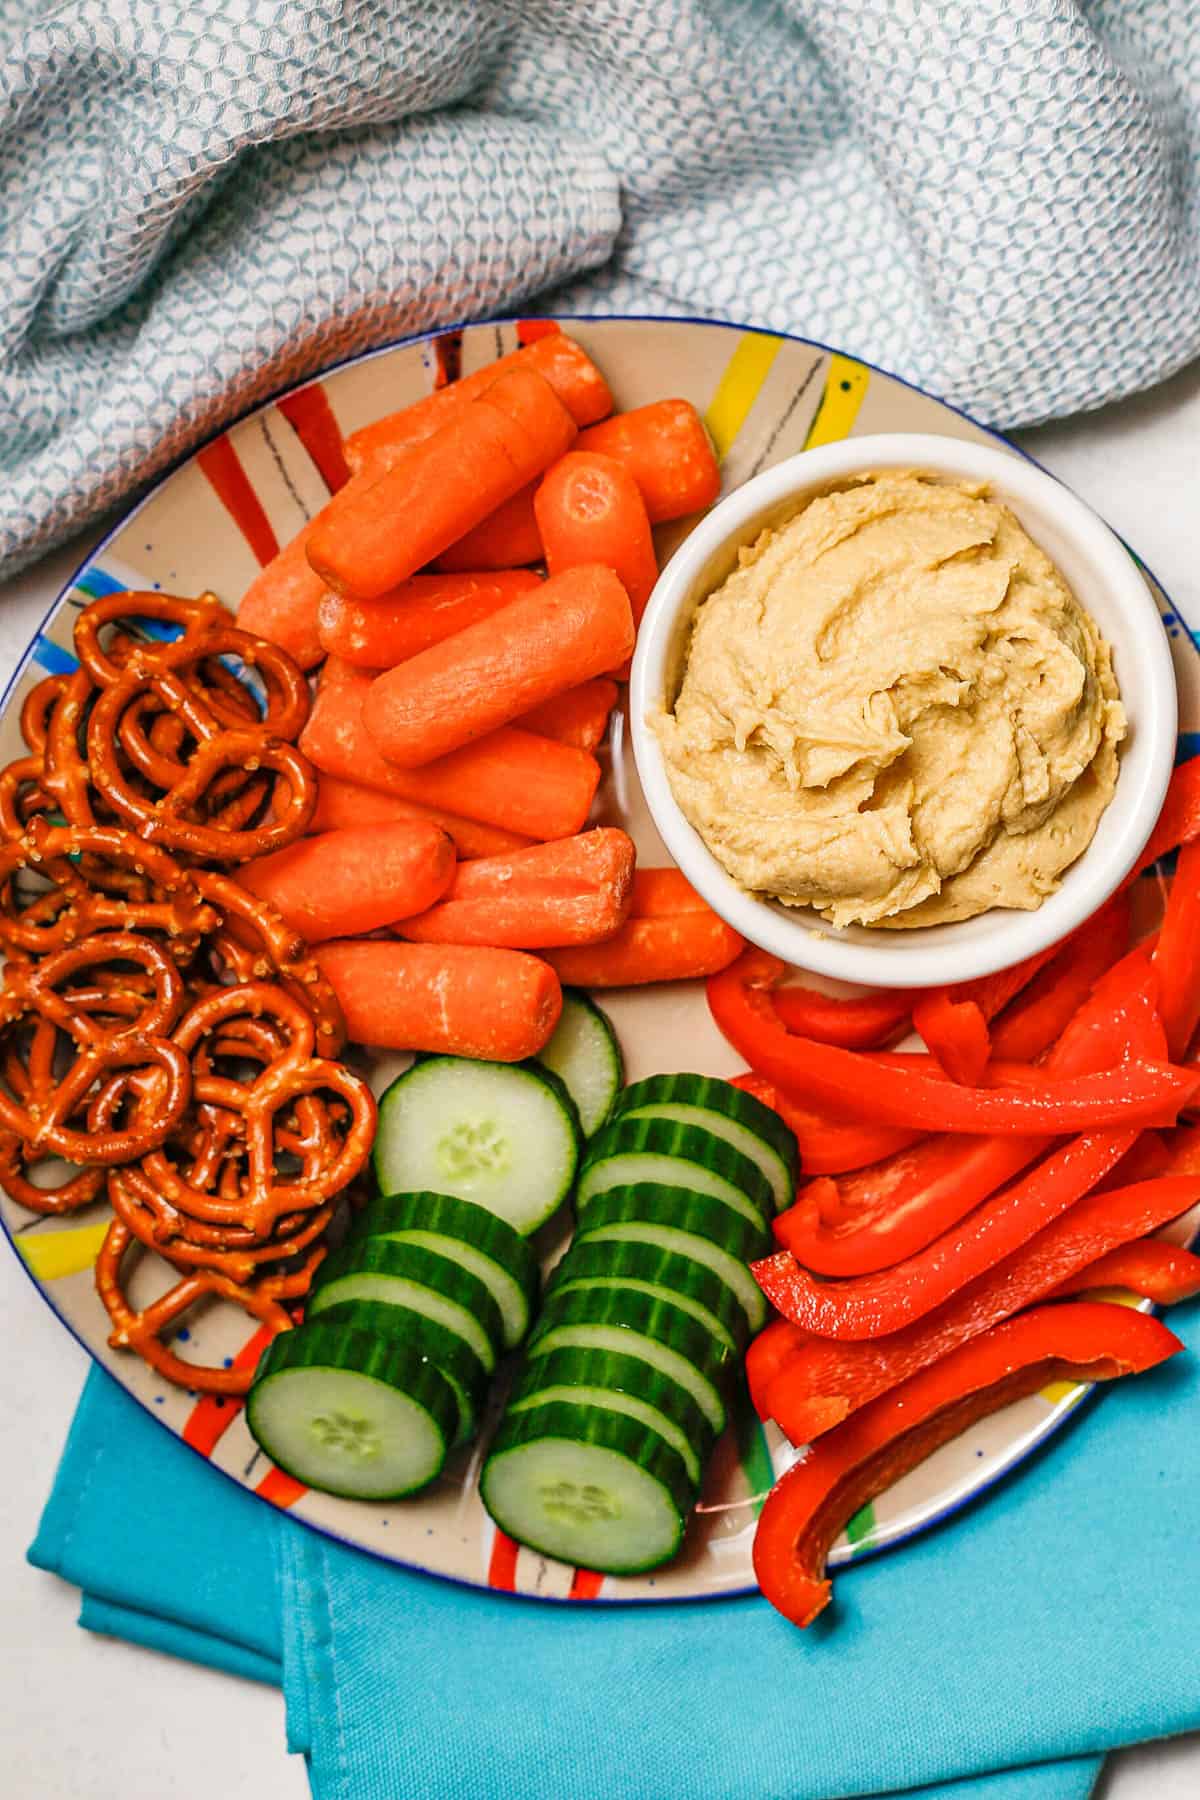 A plate full of fresh veggies and pretzels and a bowl of hummus for dipping.